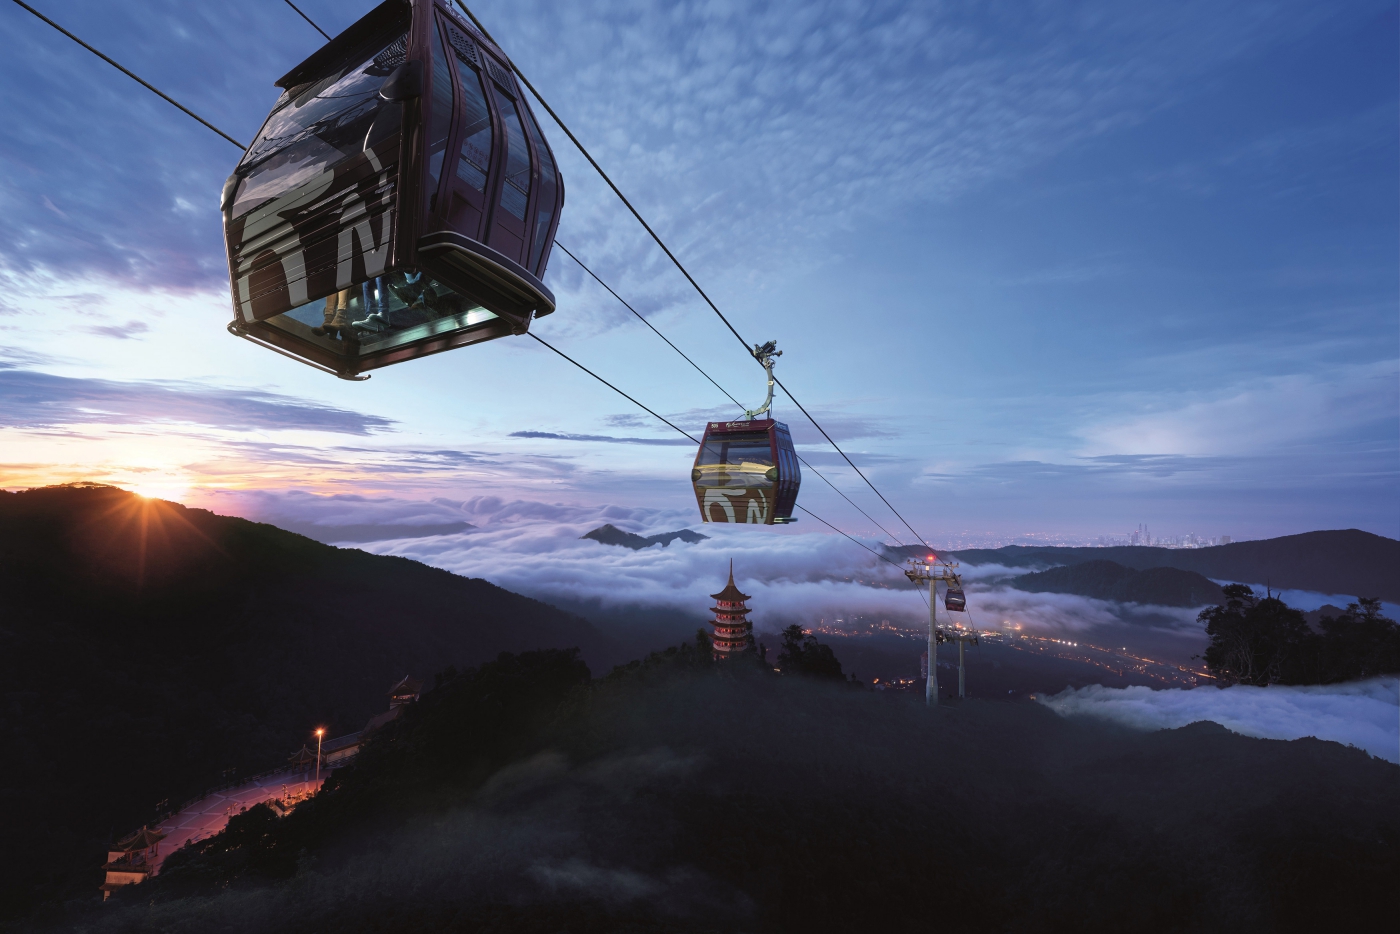 [SALE] Awana SkyWay Gondola Cable Car in Genting Highlands (QR Code